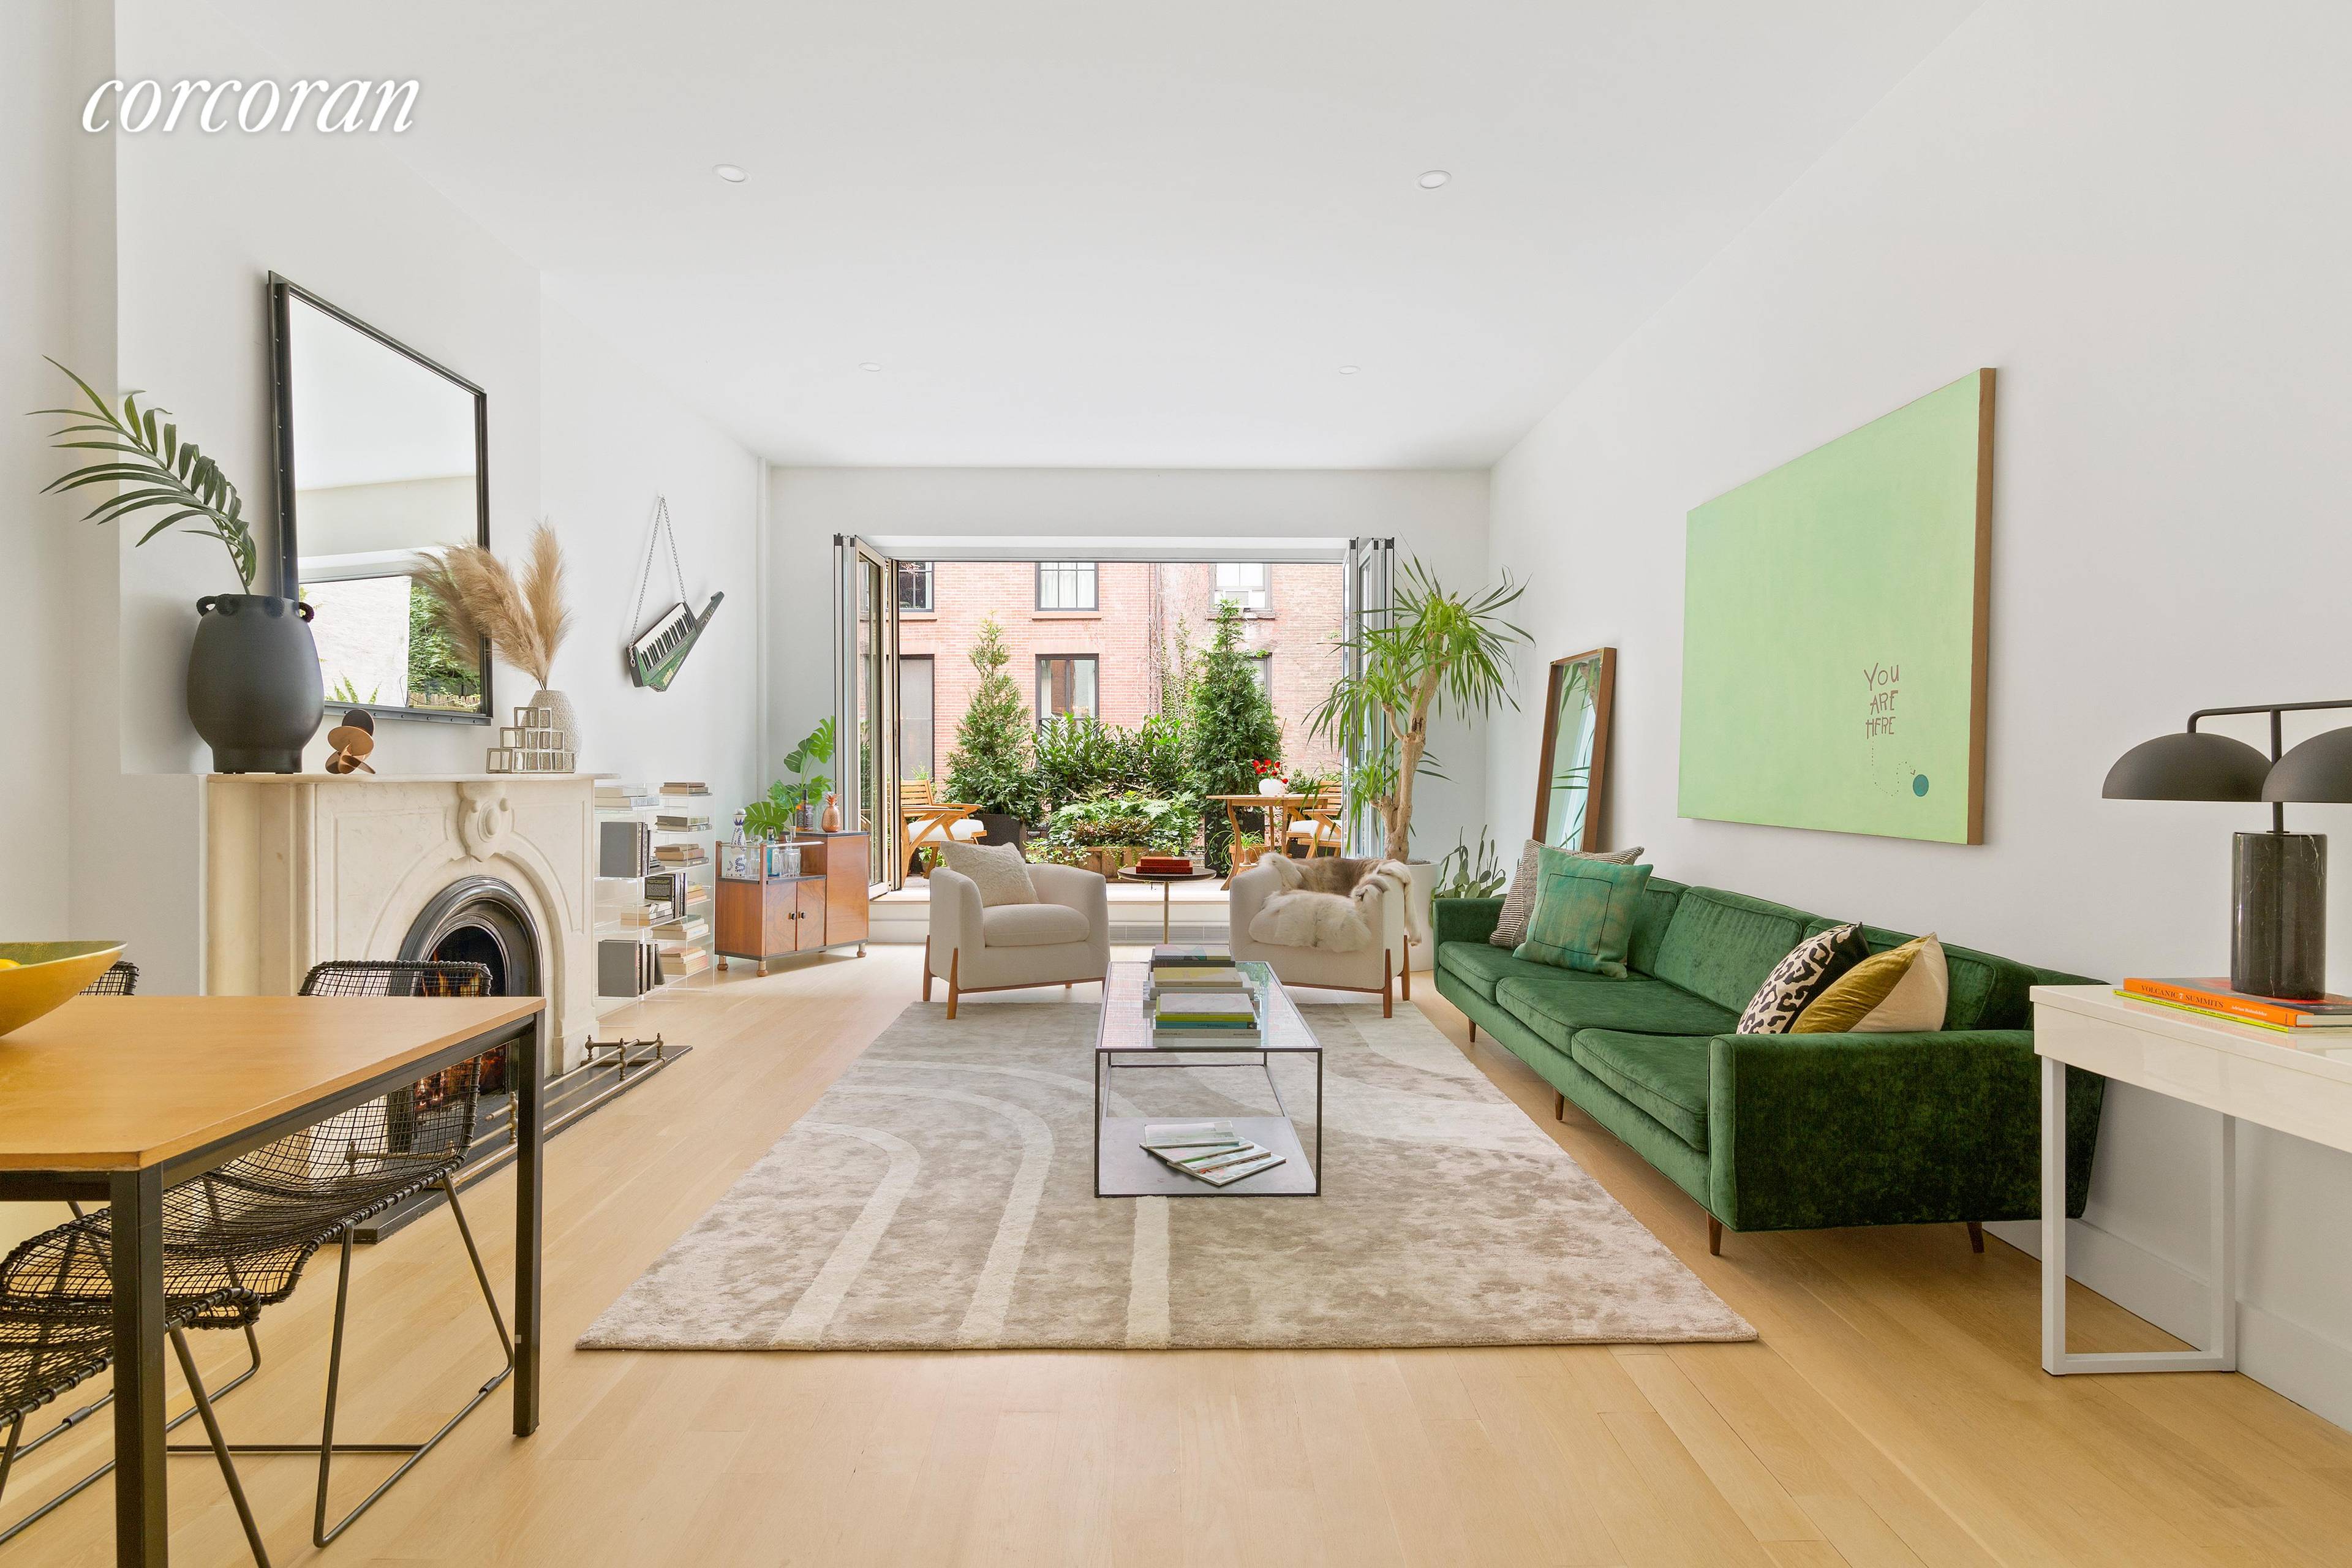 Lofty 10 foot ceilings, high designer renovation, lush planted terrace, and intimately sized pre war building make for truly the ultimate combination on this most beloved Greenwich Village block.